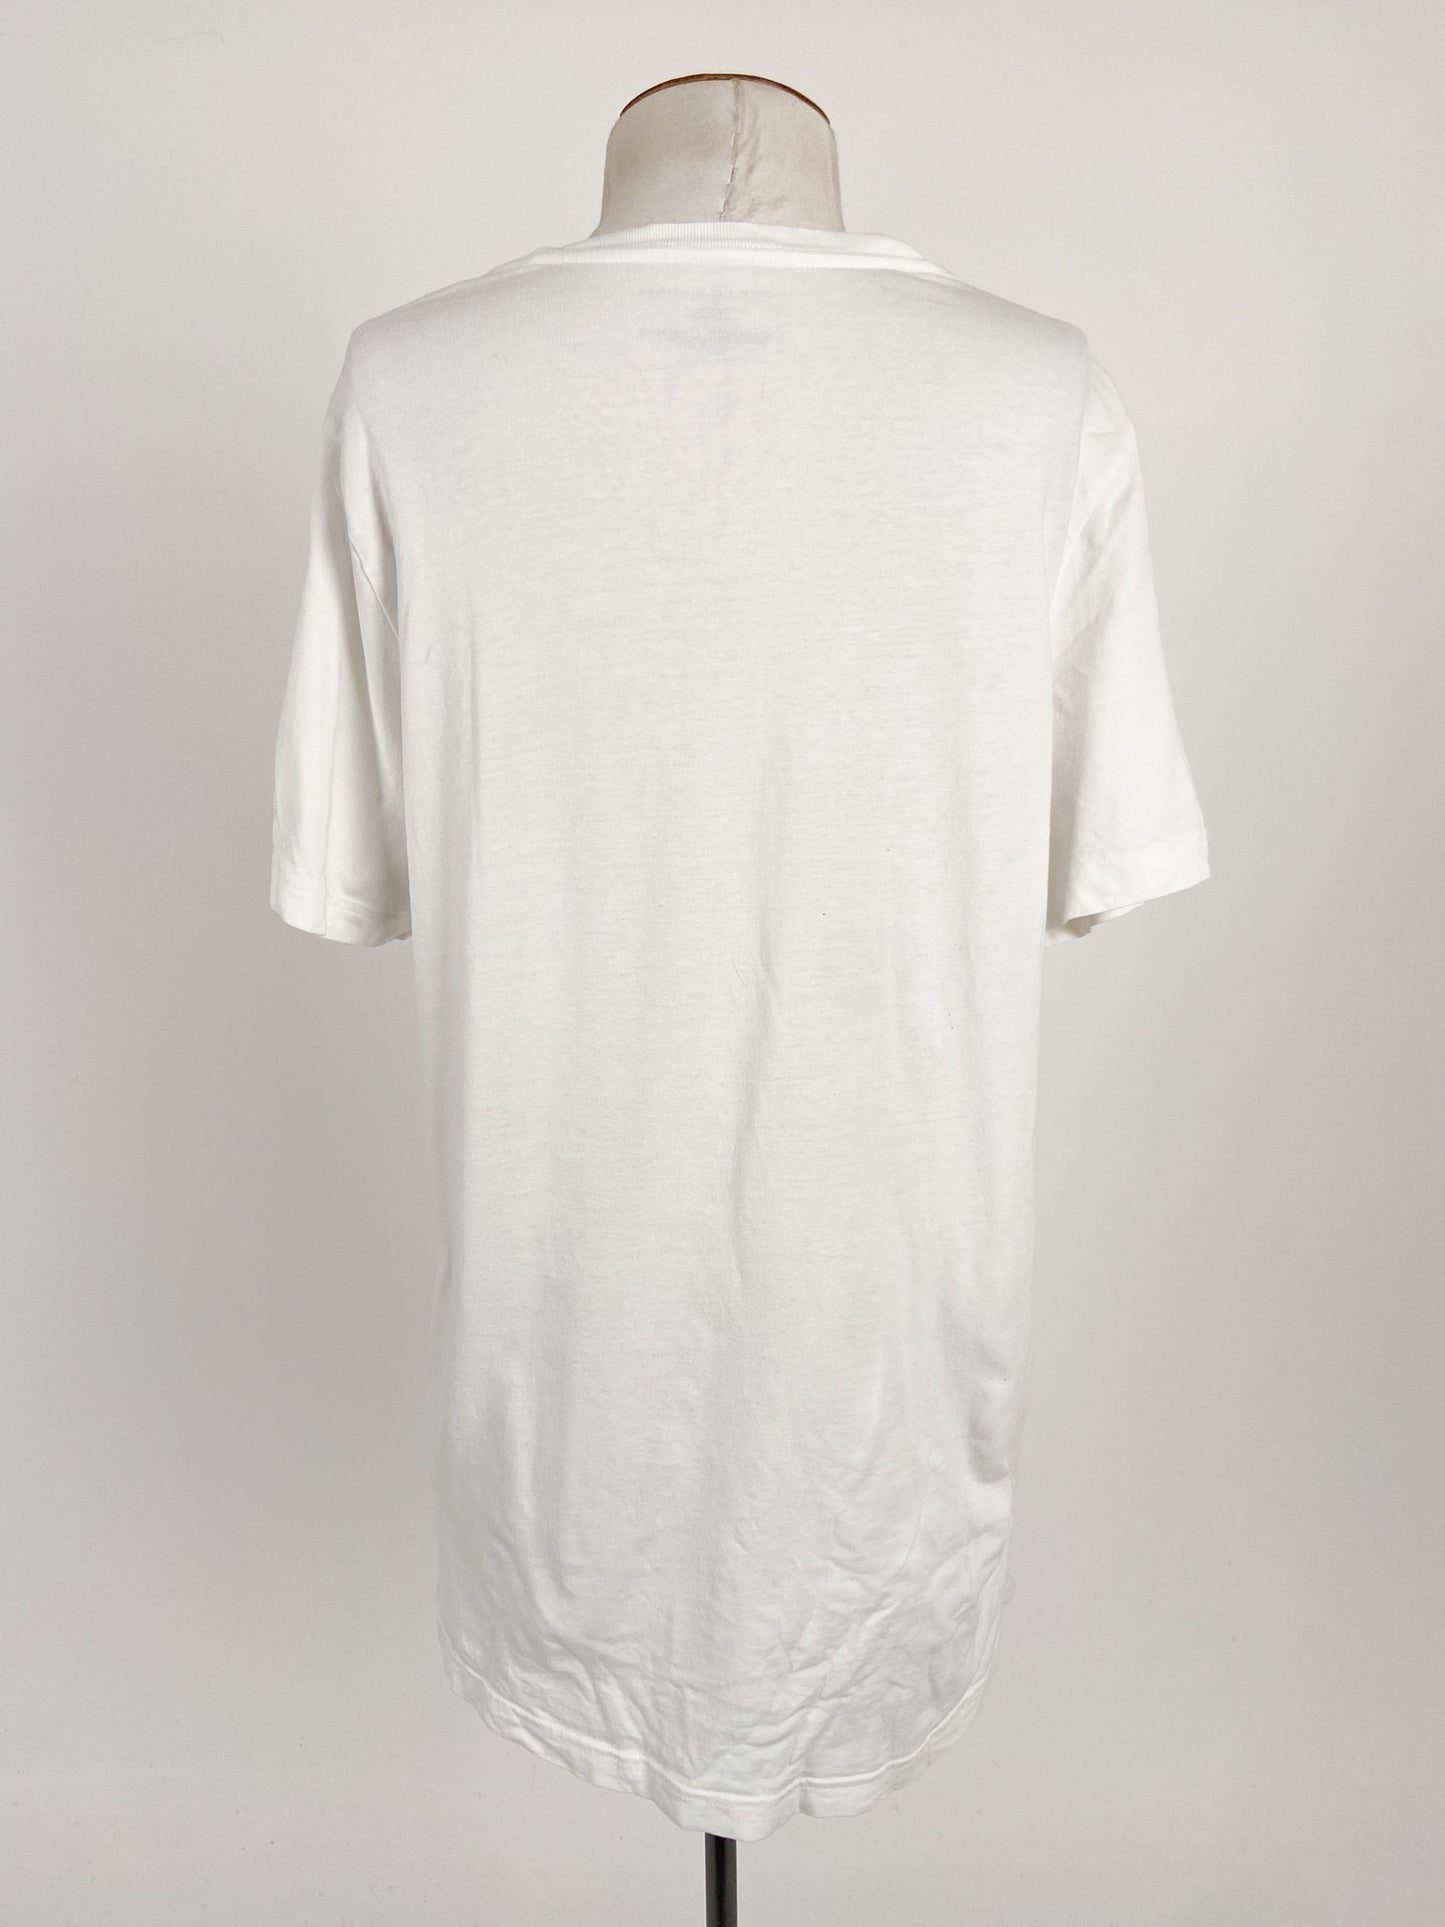 Tommy Hilfiger | White Casual Top | Size S